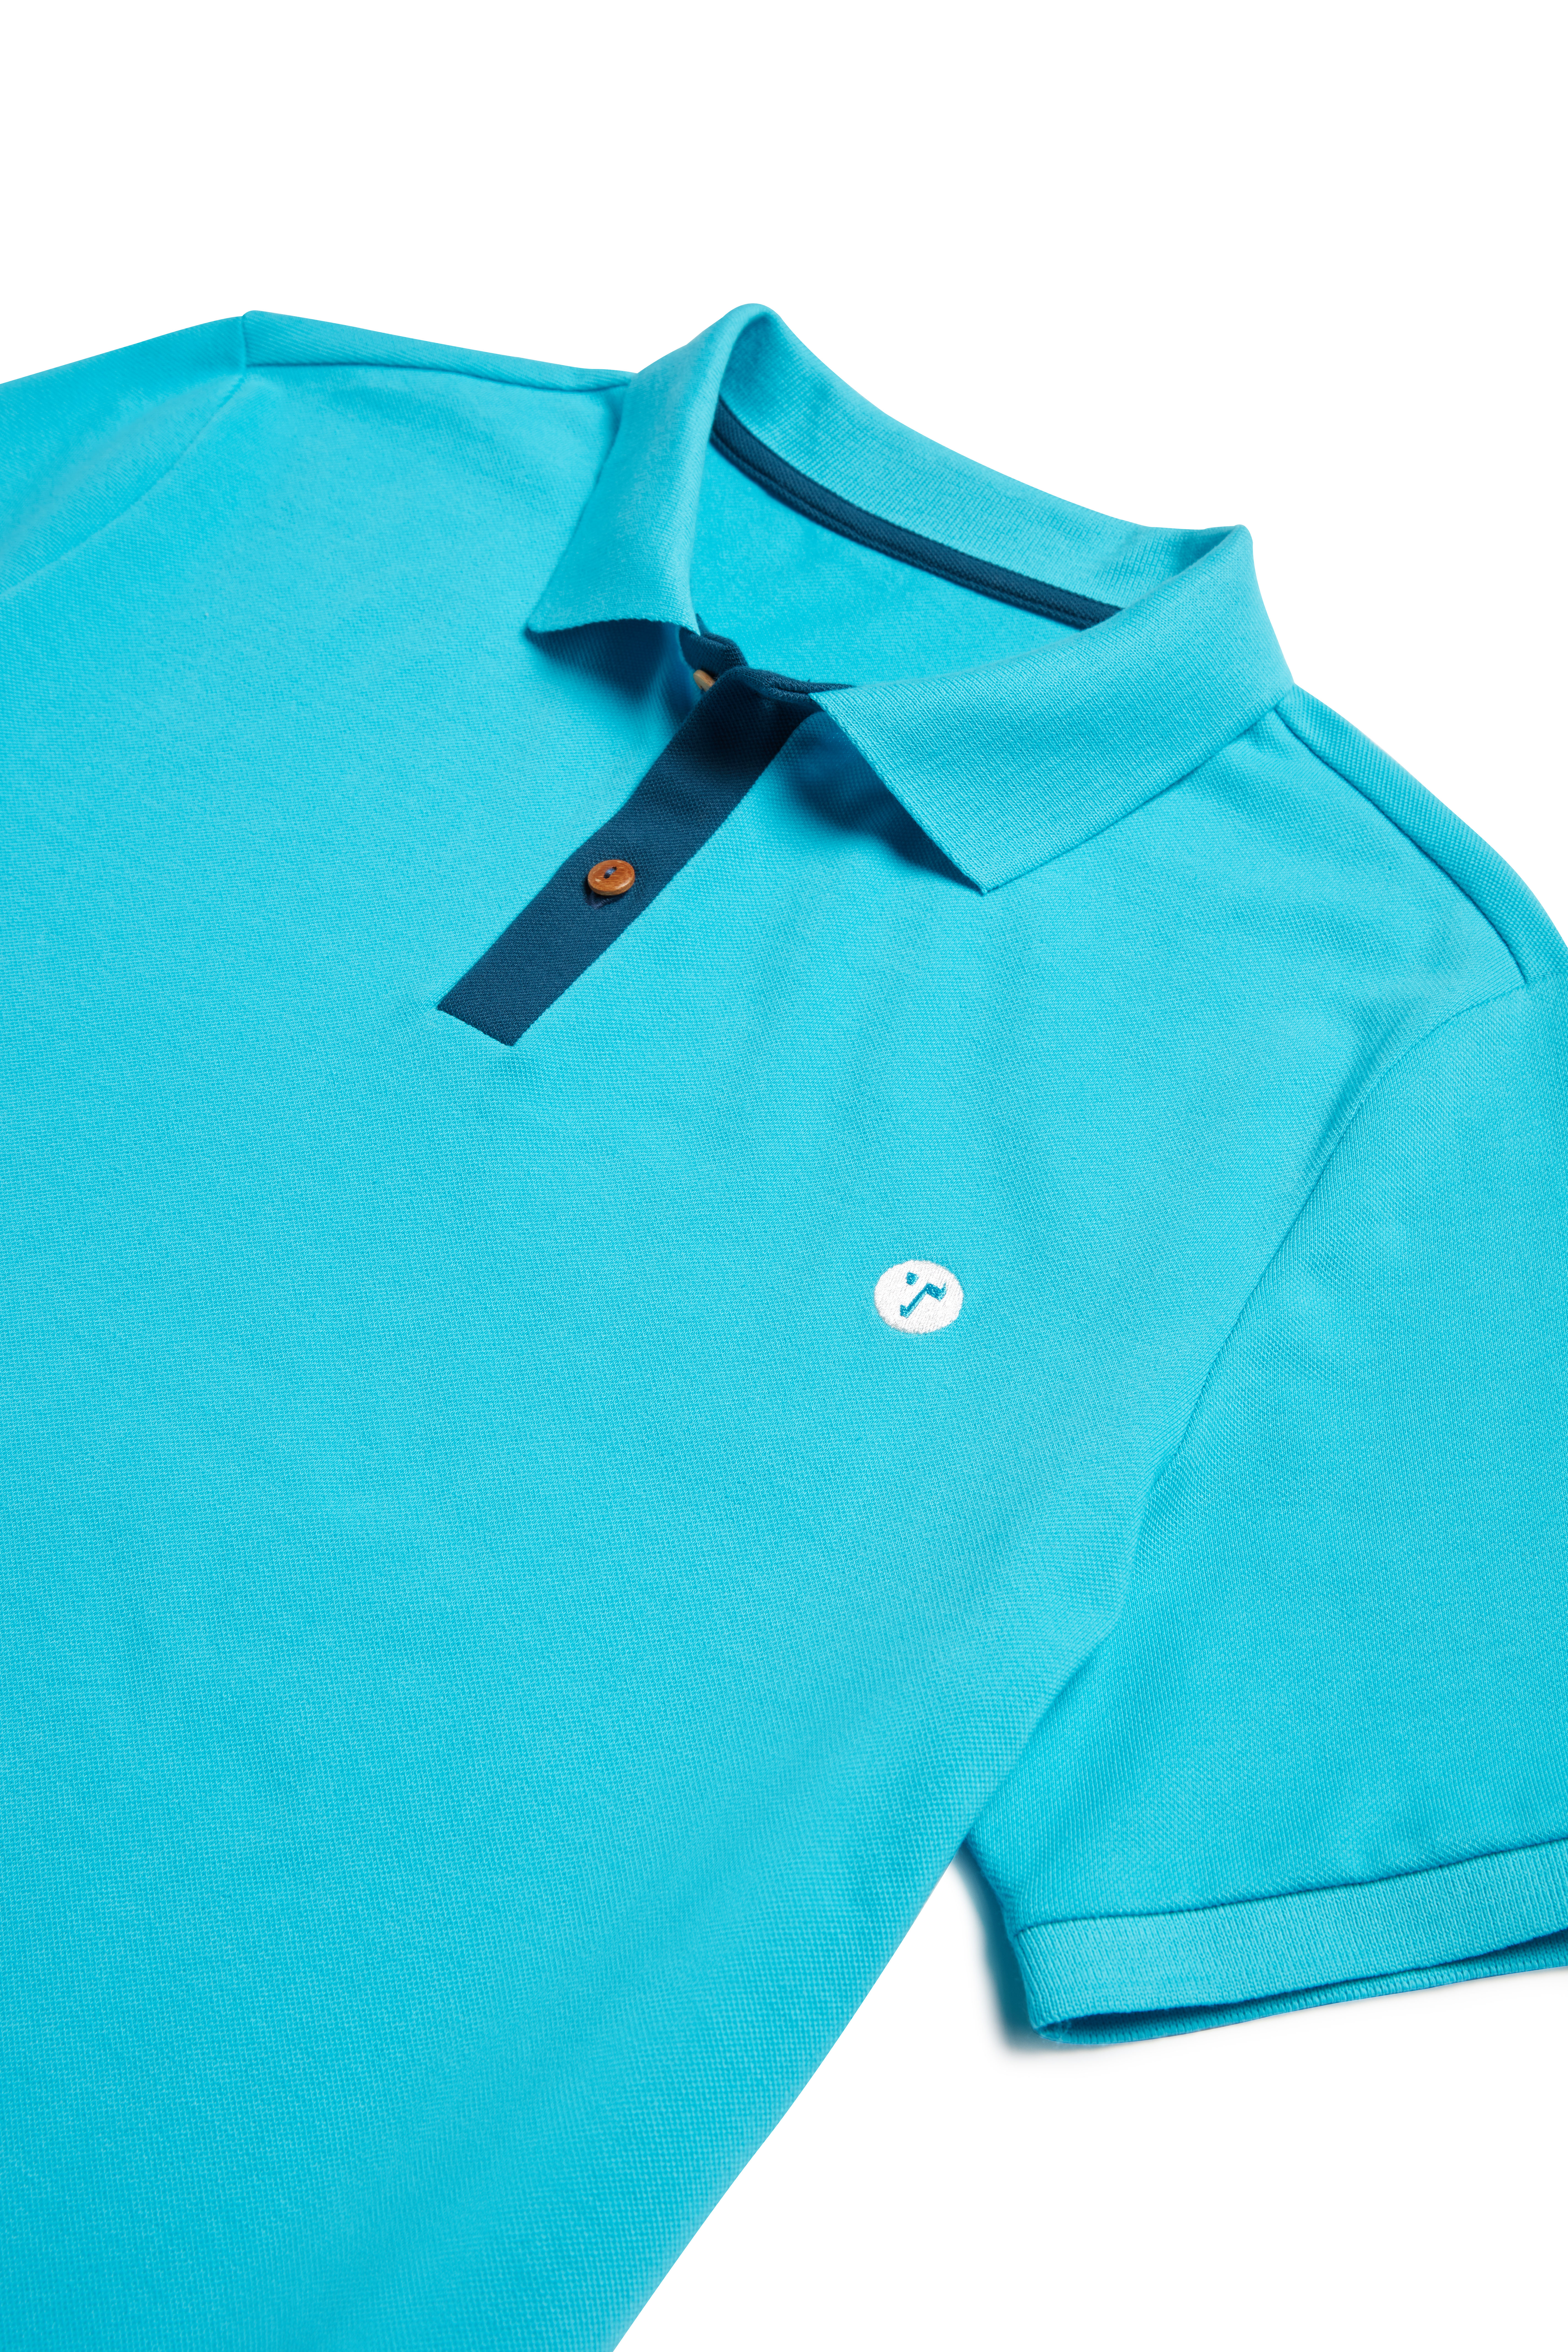 EXCLUSIVE: OCEAN TEE talks new Mako polo shirt and sustainability